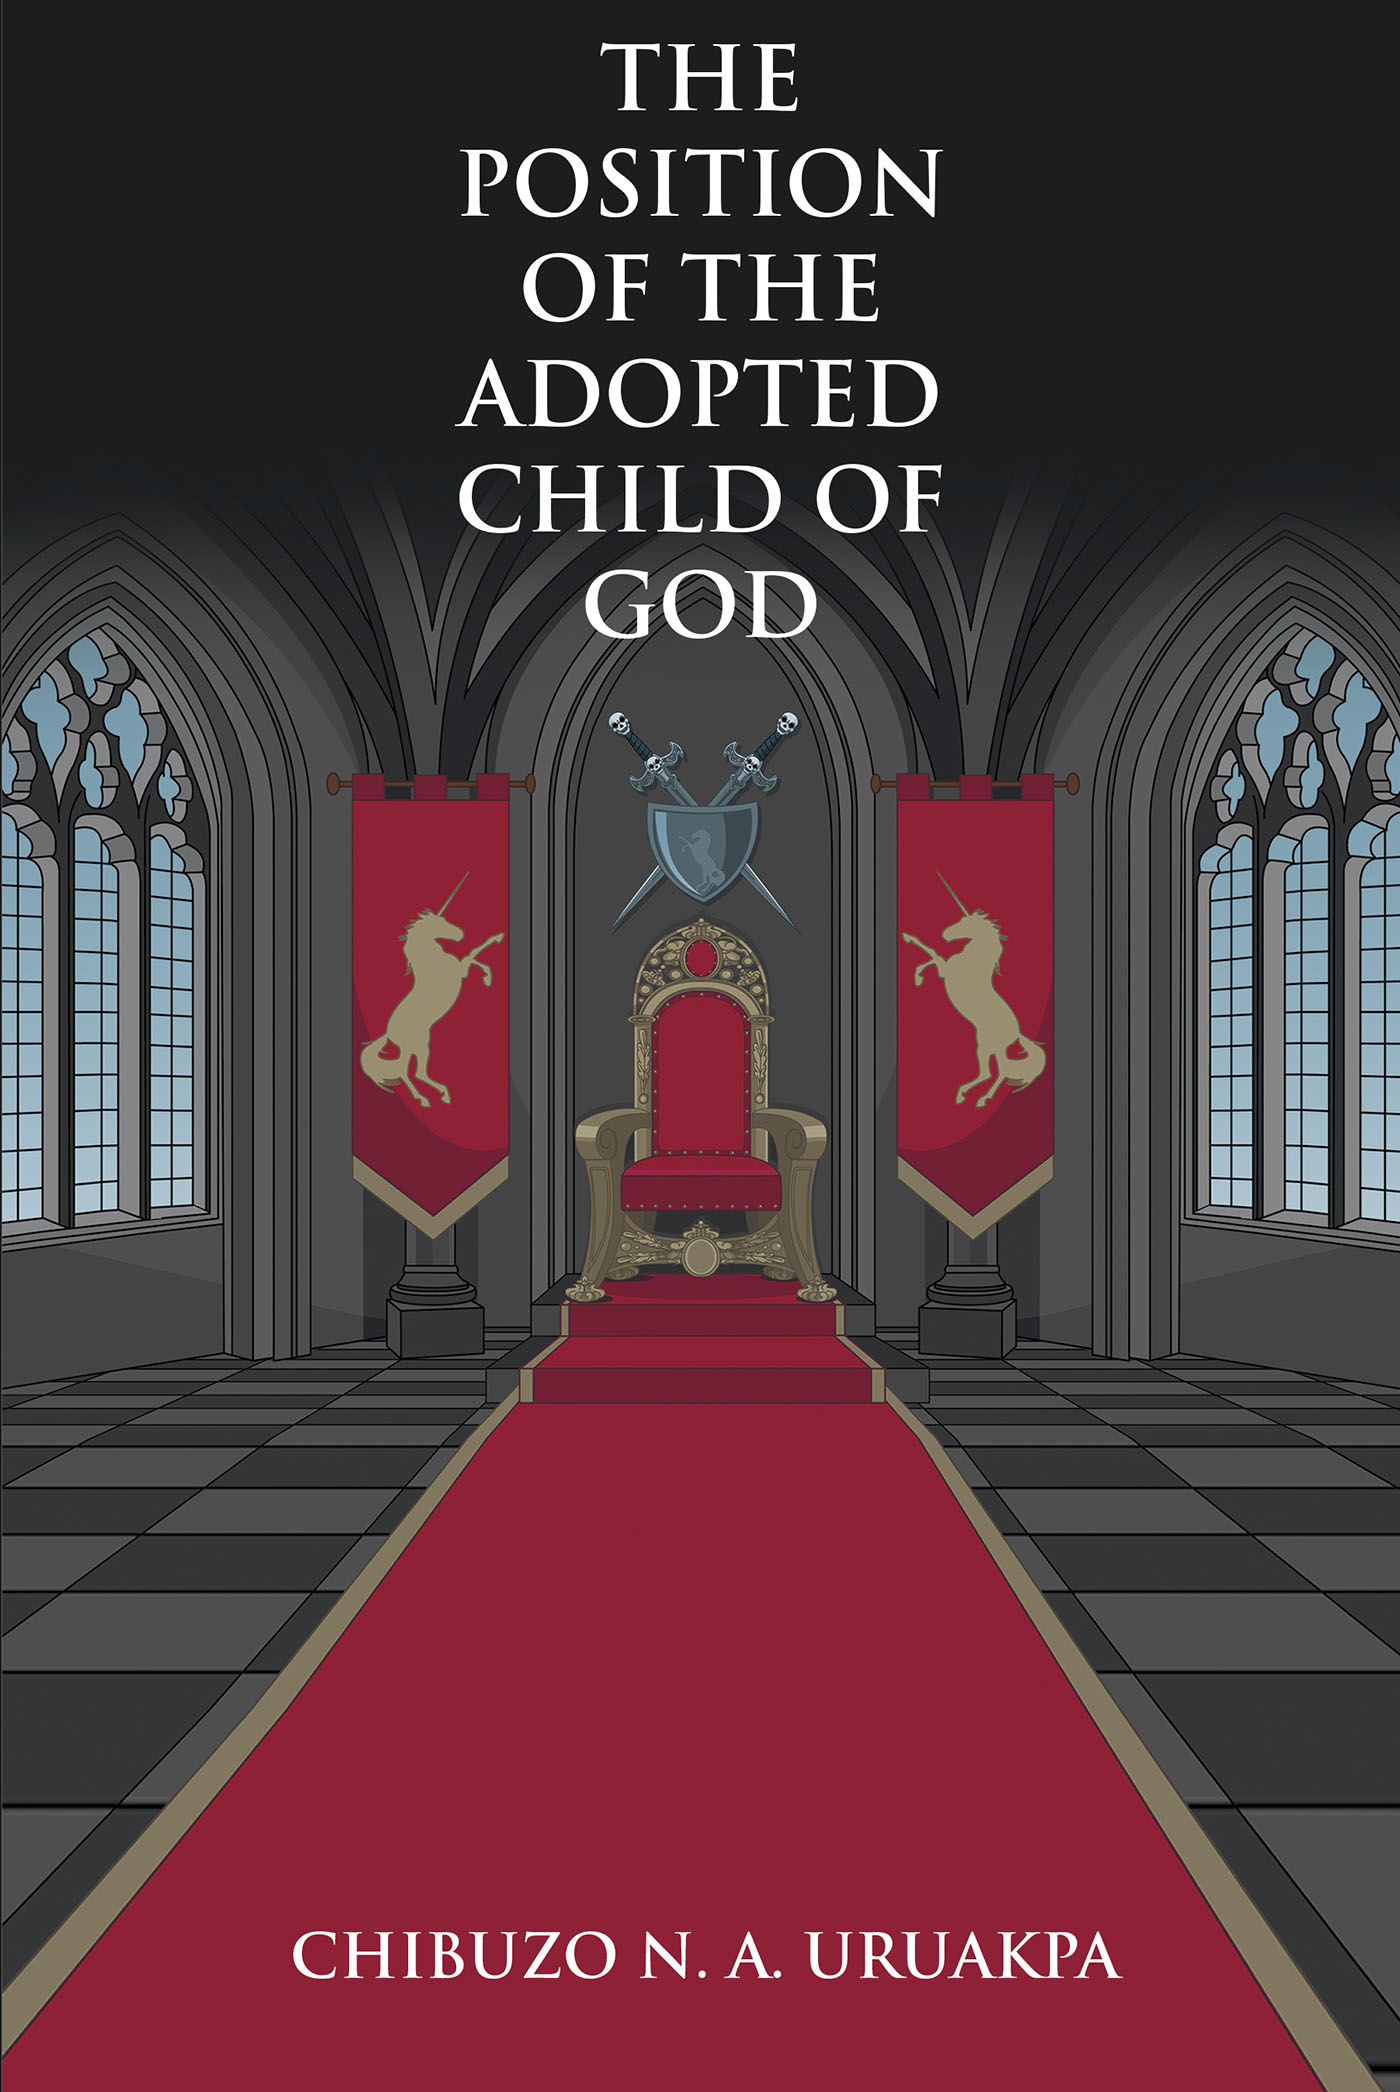 Author Chibuzo N. A. Uruakpa’s New Book, “The Position of the Adopted Child of God,” Reveals the Incredible Adoption Process When One Accepts Christ Into Their Heart